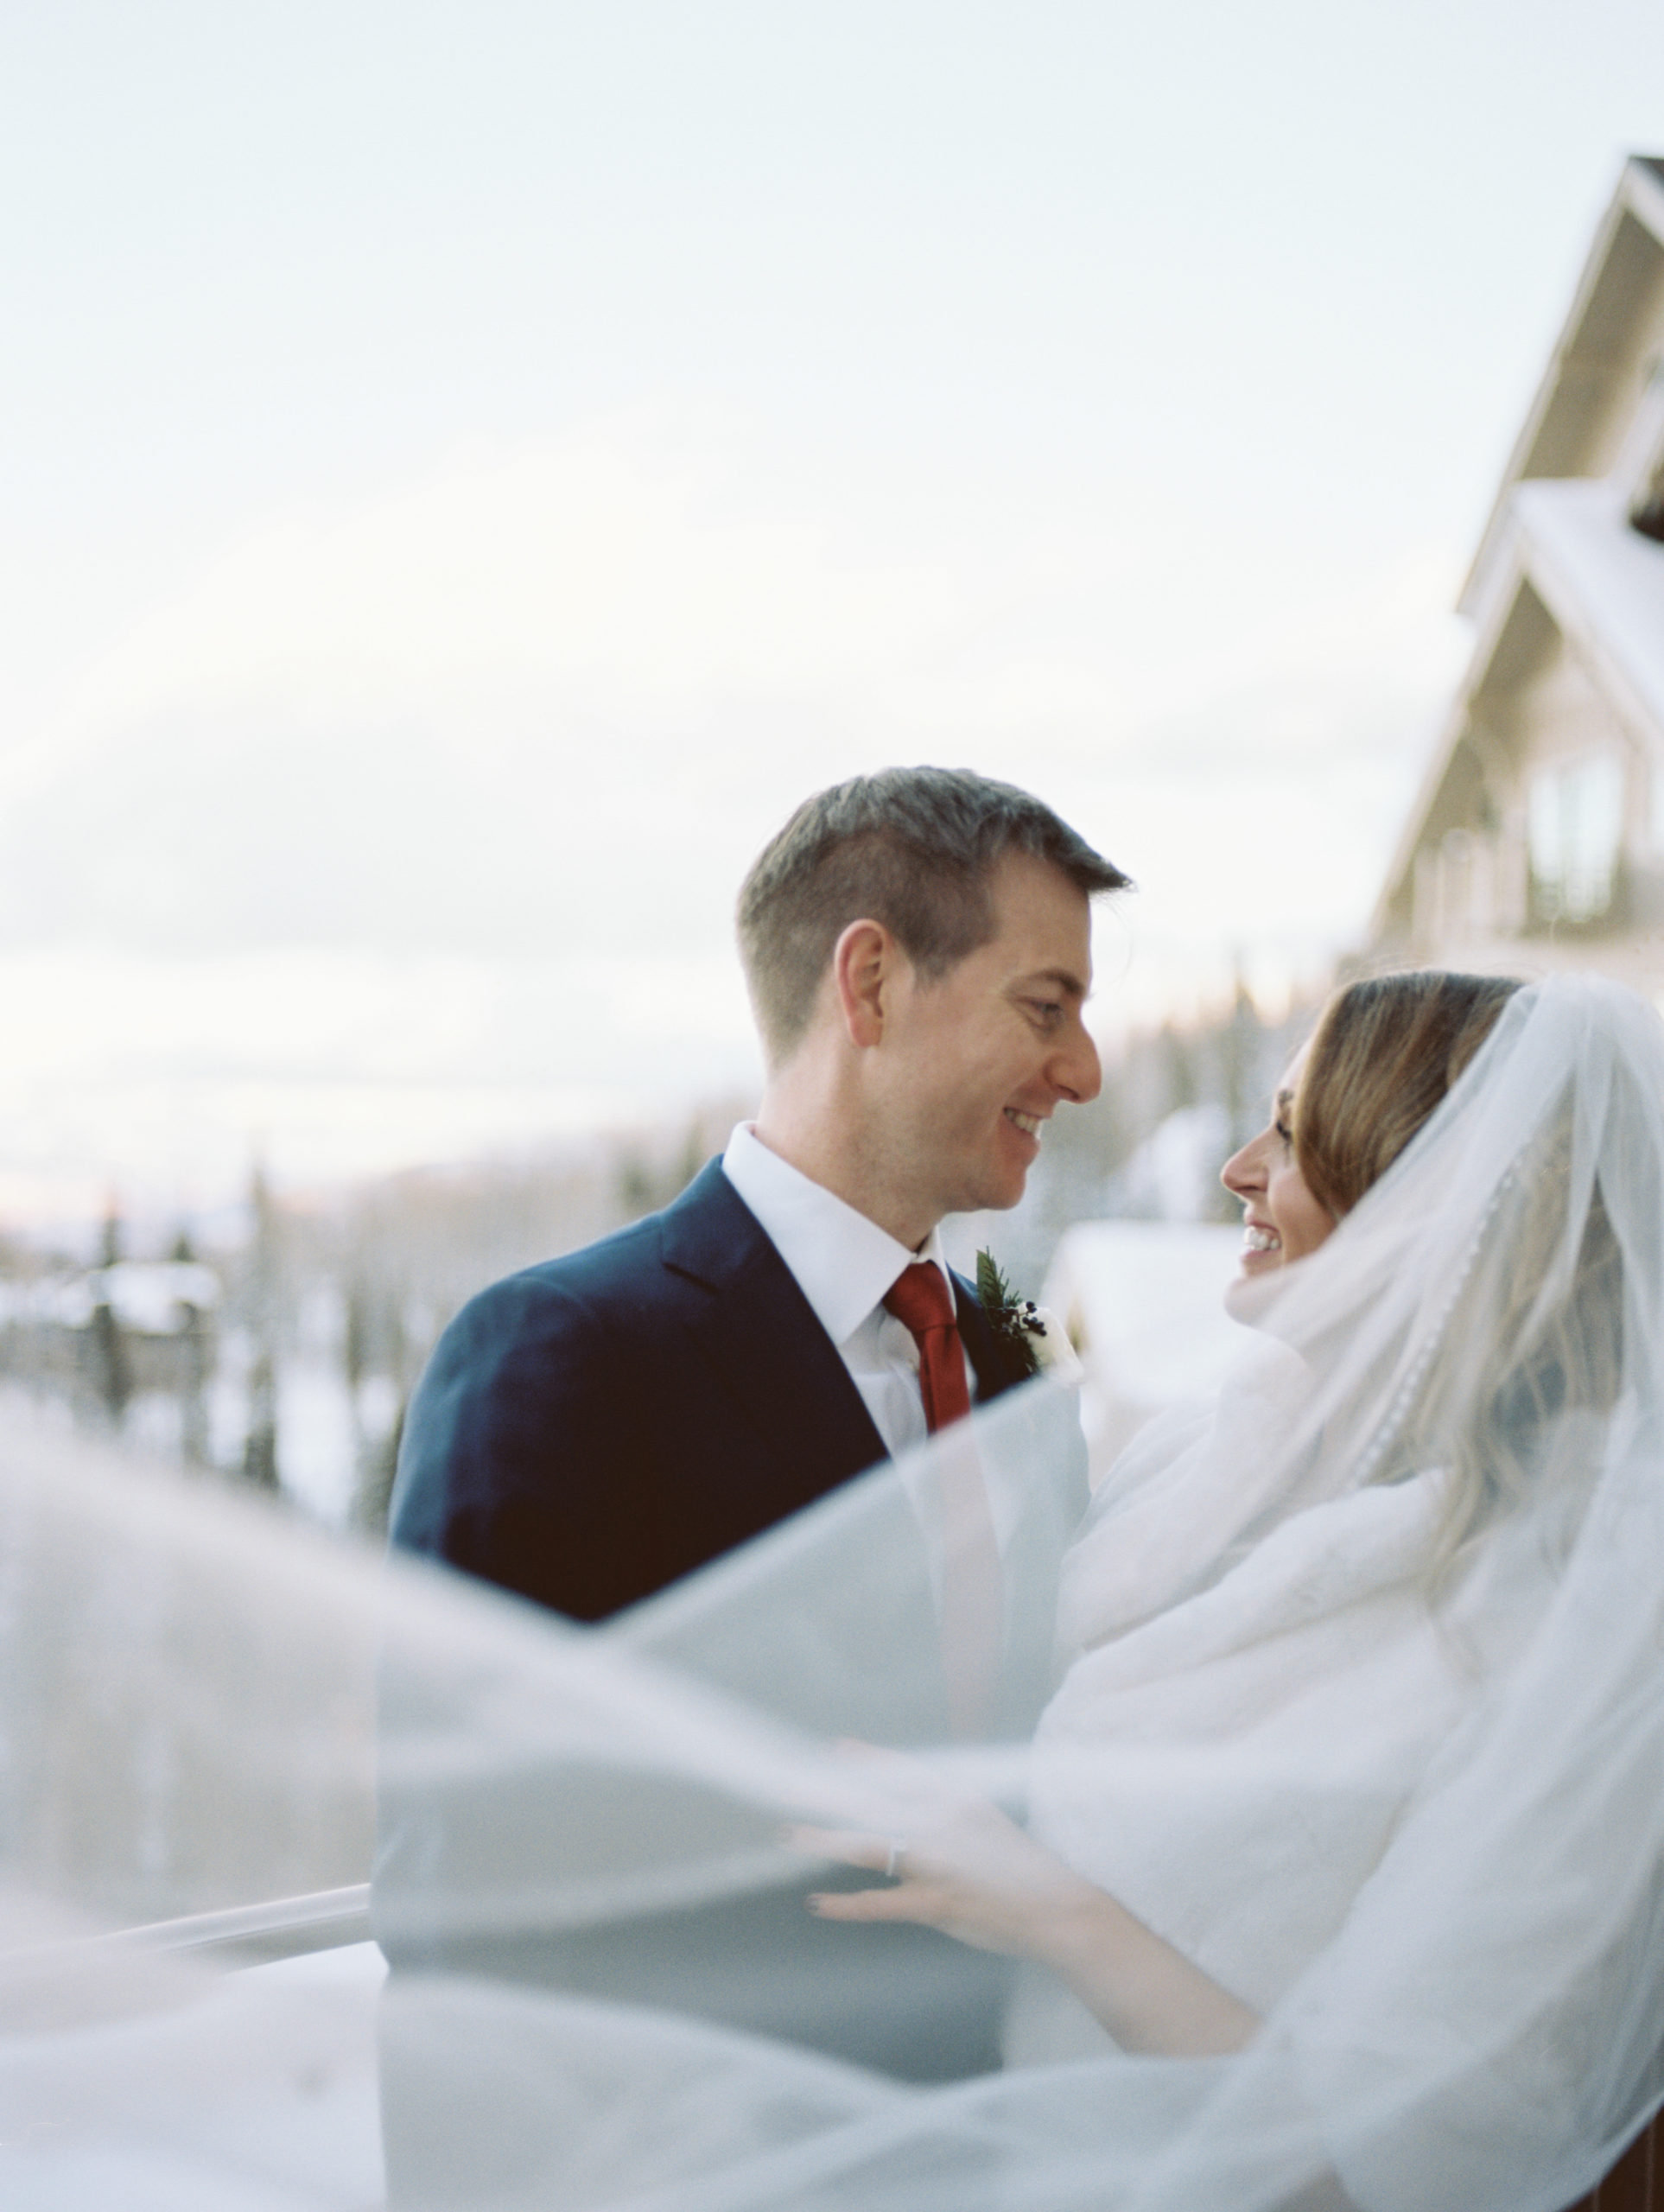 A picture zoomed in of the bride and groom. They are staring into each others eye where you can clearly see their love. The bride's veil flows in front of them to create a beautiful contrast in the picture. A dream Park City winter wedding.